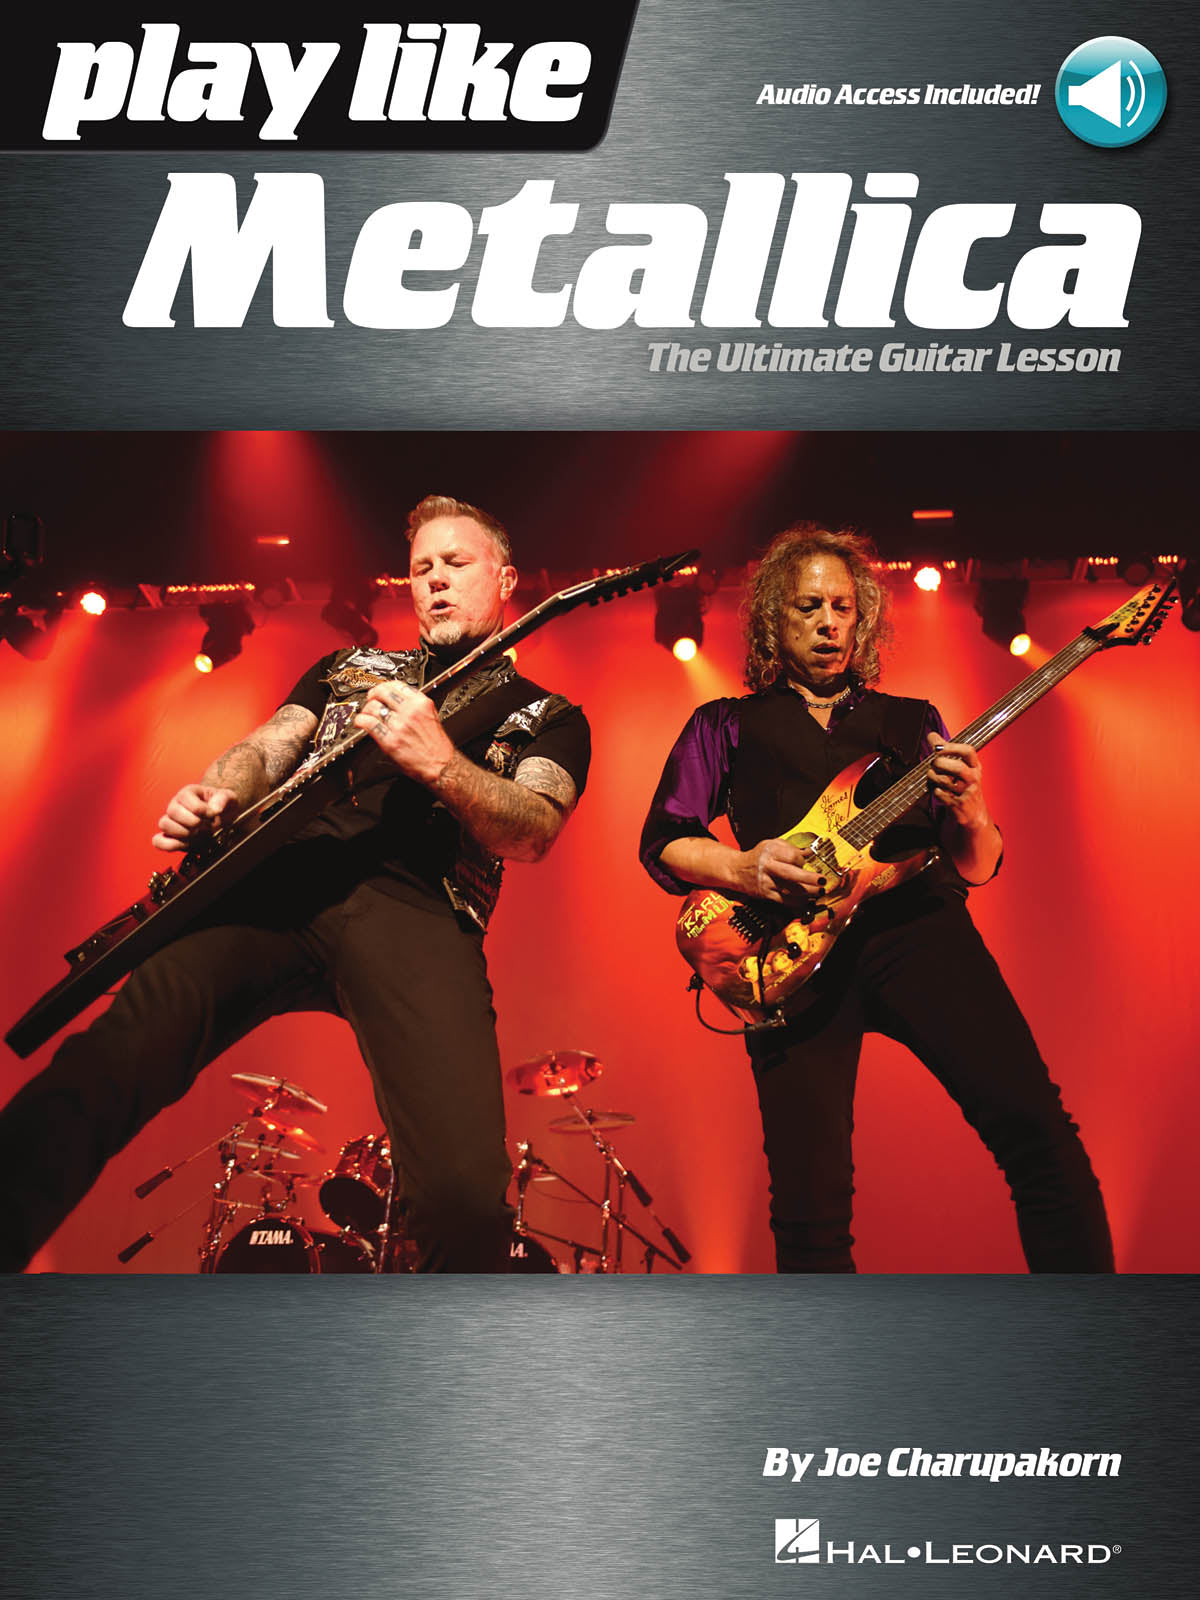 Image 1 of Play Like Metallica - The Ultimate Guitar Lesson - SKU# 49-248911 : Product Type Media : Elderly Instruments